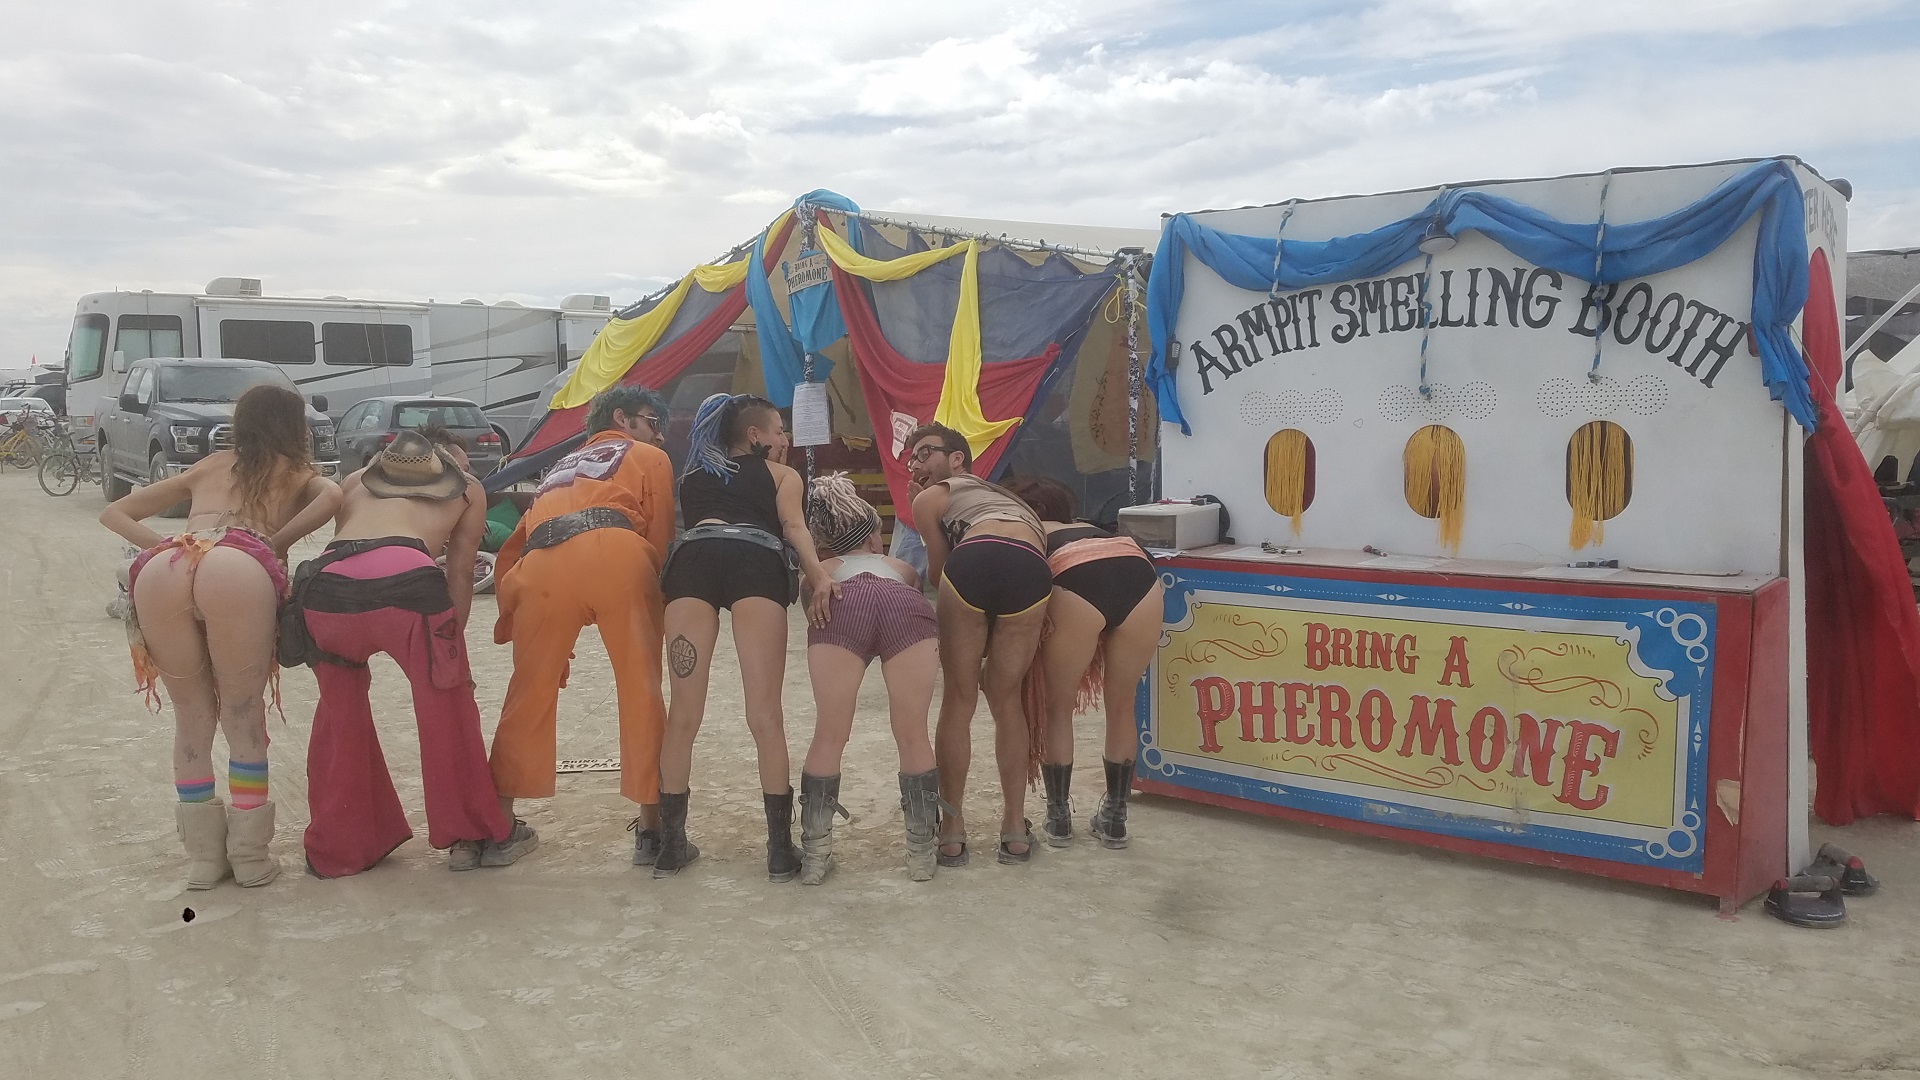 andy kanter recommends Burning Man Glory Hole